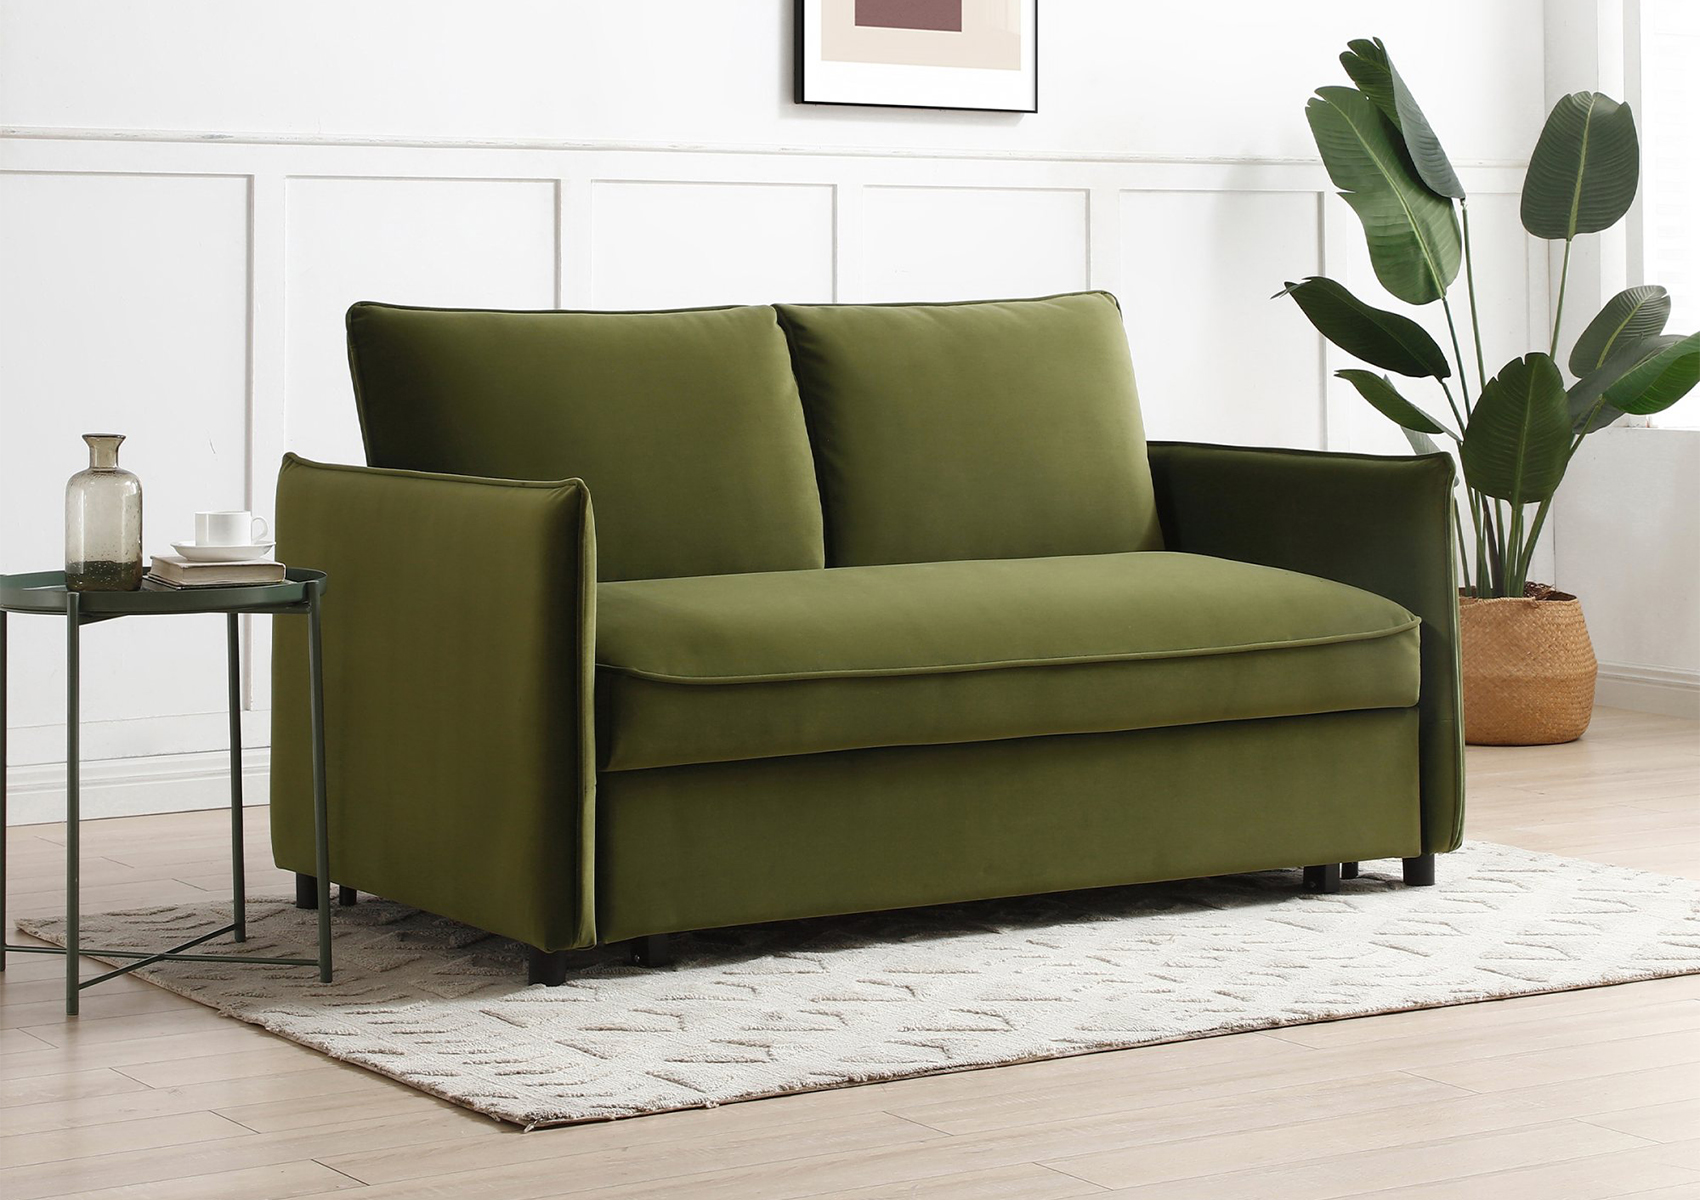 View Coniston Olive Green 2 Seater Sofa Bed Time4Sleep information